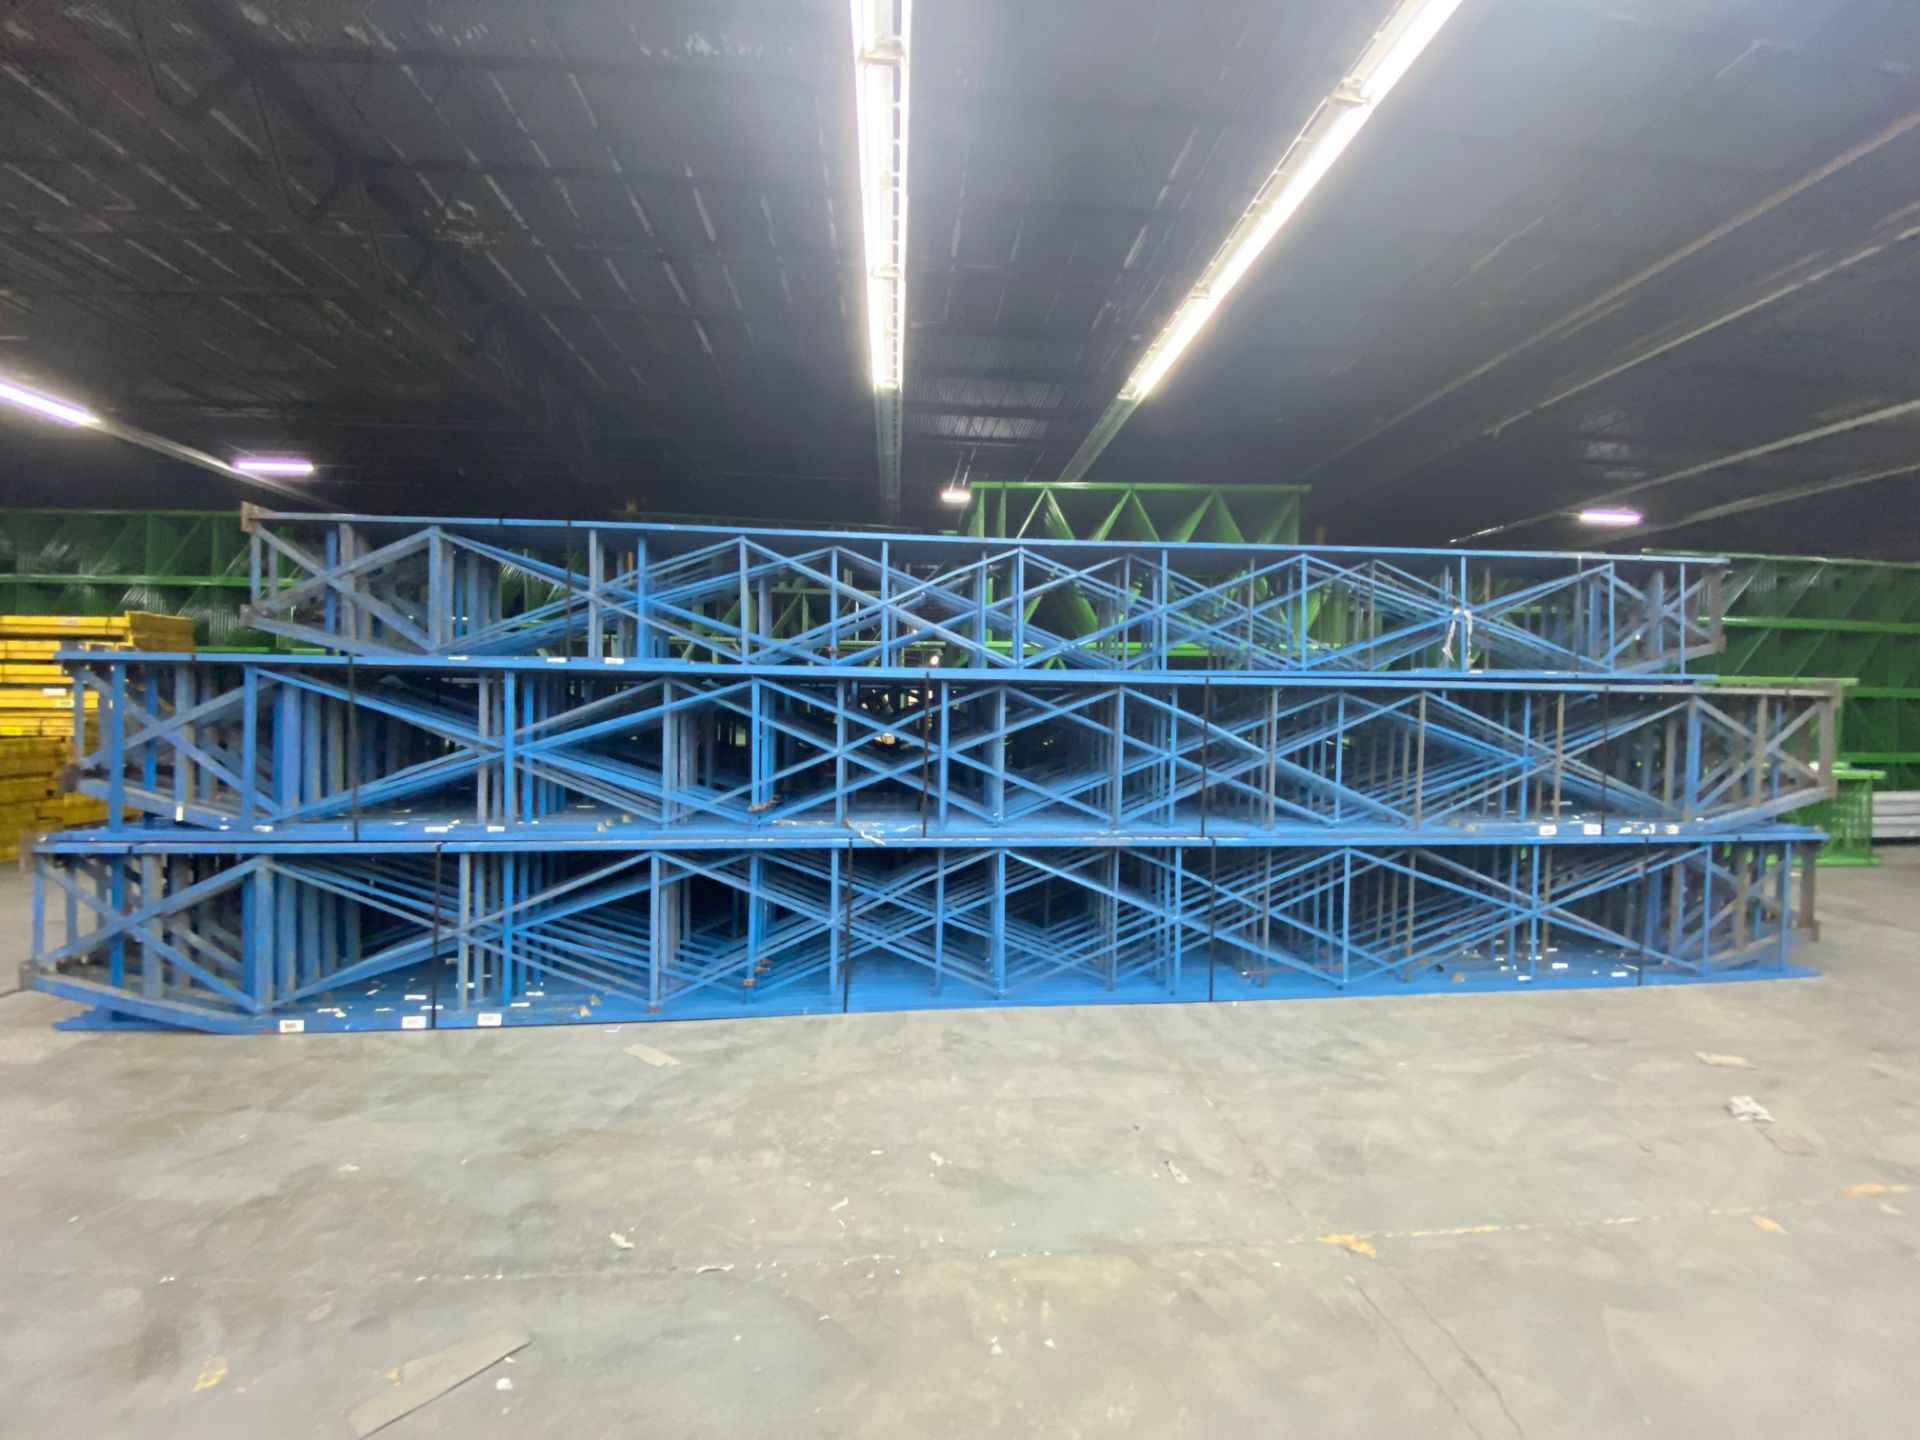 (15X) USED STRUCTURAL UPRIGHT. SIZE 30'H TO 33'H X 36"D, BLUE - Image 2 of 3